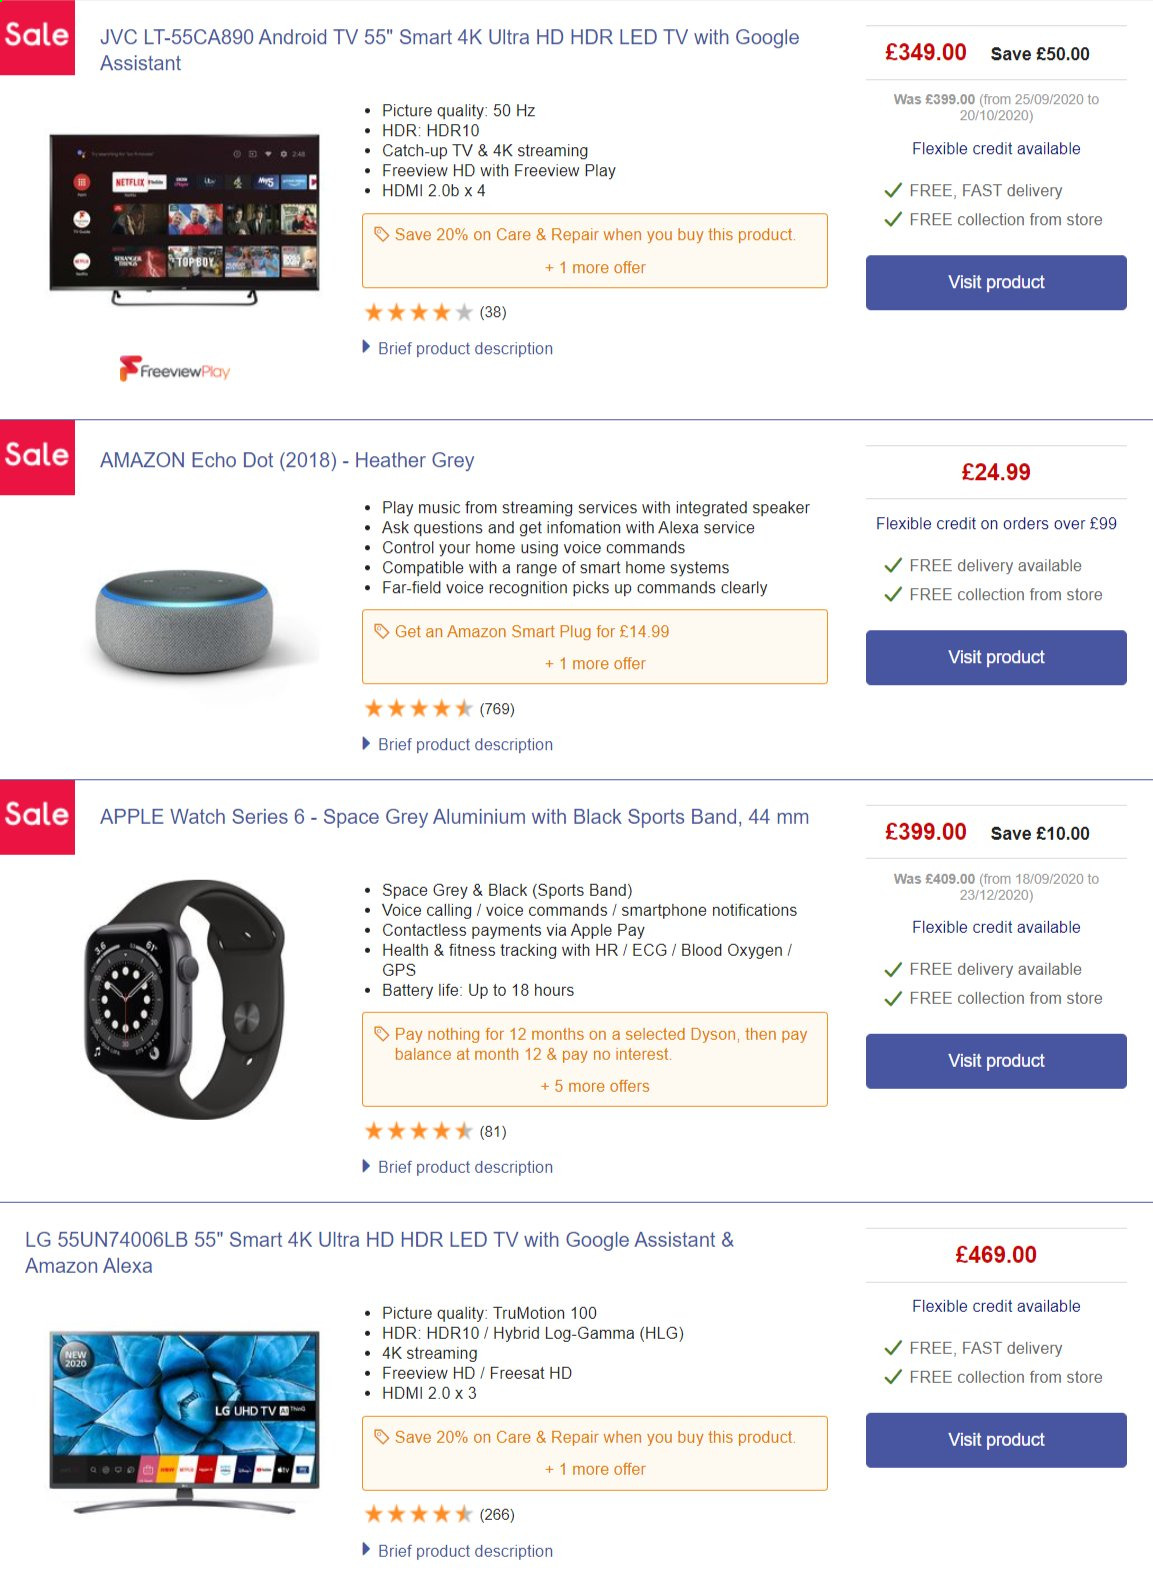 thumbnail - Currys PC World offer  - Sales products - Apple, LG, smartphone, Apple Watch, JVC, Android TV, LED TV, UHD TV, ultra hd, TV, Amazon Echo Dot, speaker, Amazon Echo, Dyson. Page 8.